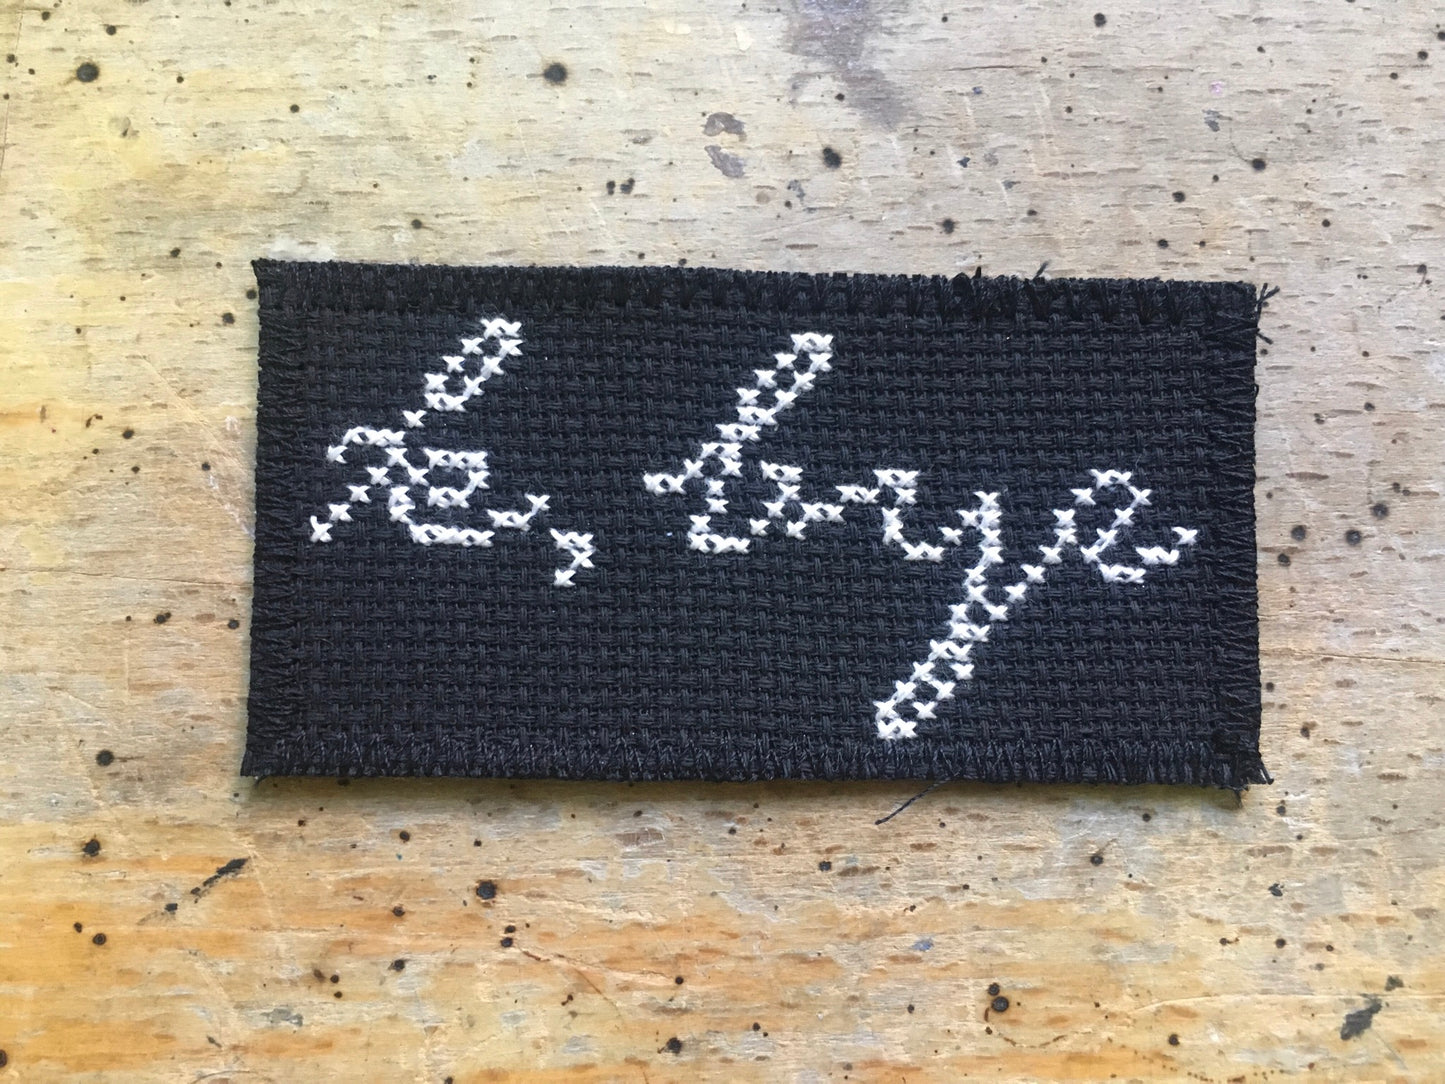 le, bye - Hand-embroidered Patch - Sajko Art